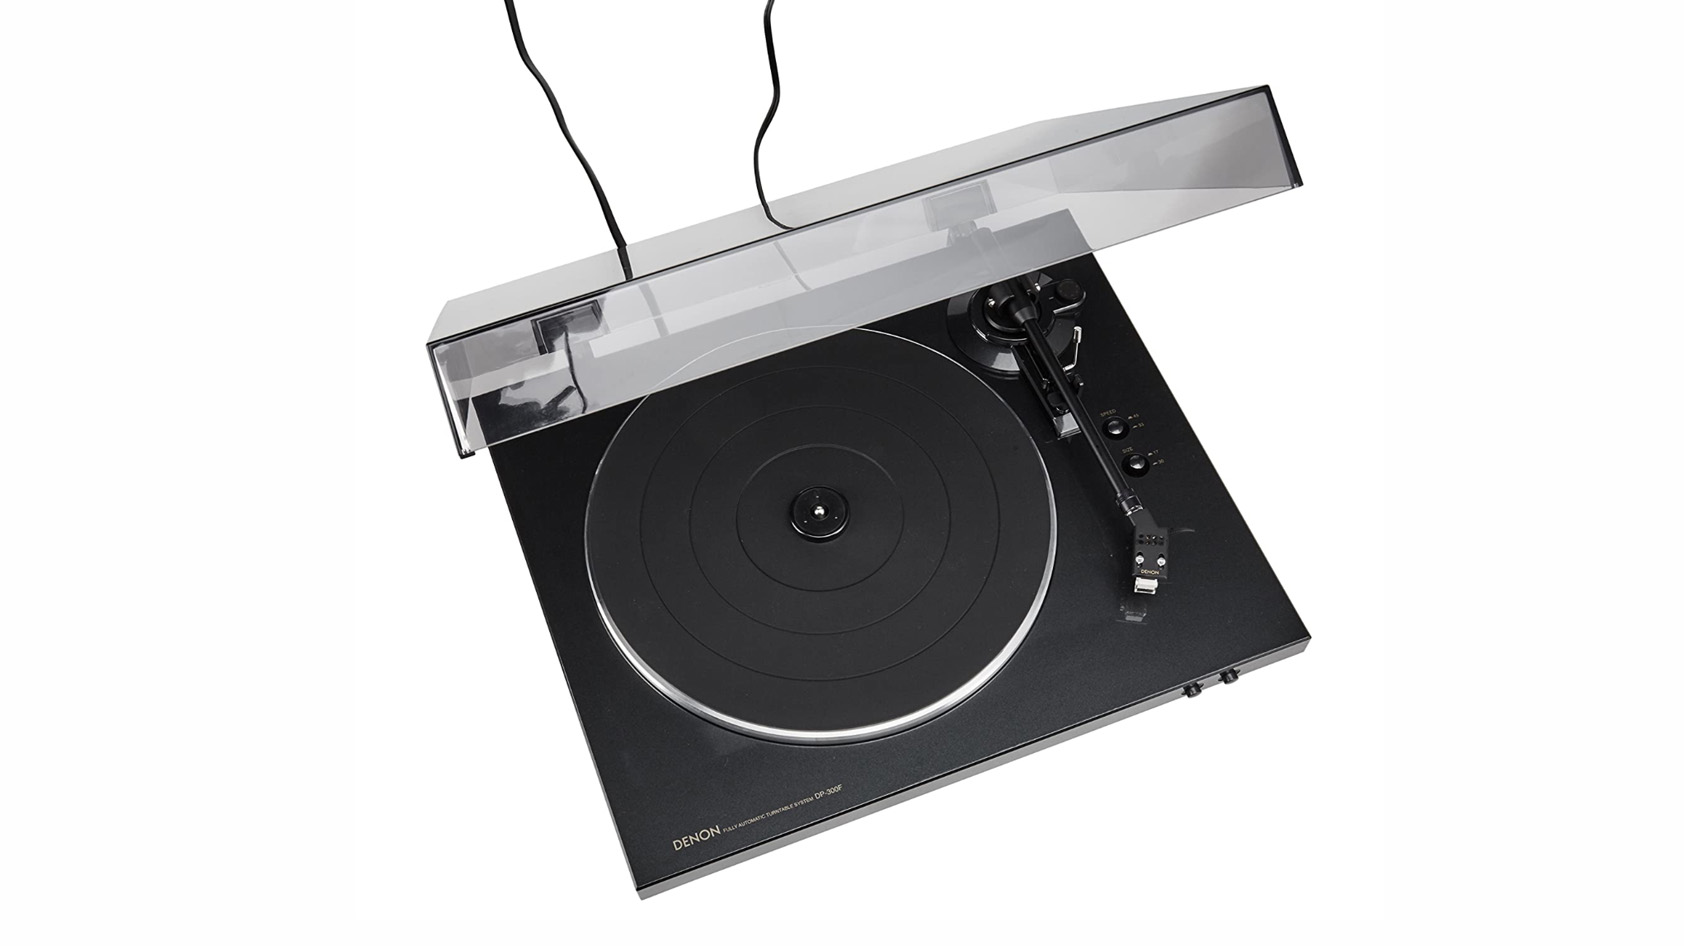 Product image of a Denon DP-300 F turntable on a white background